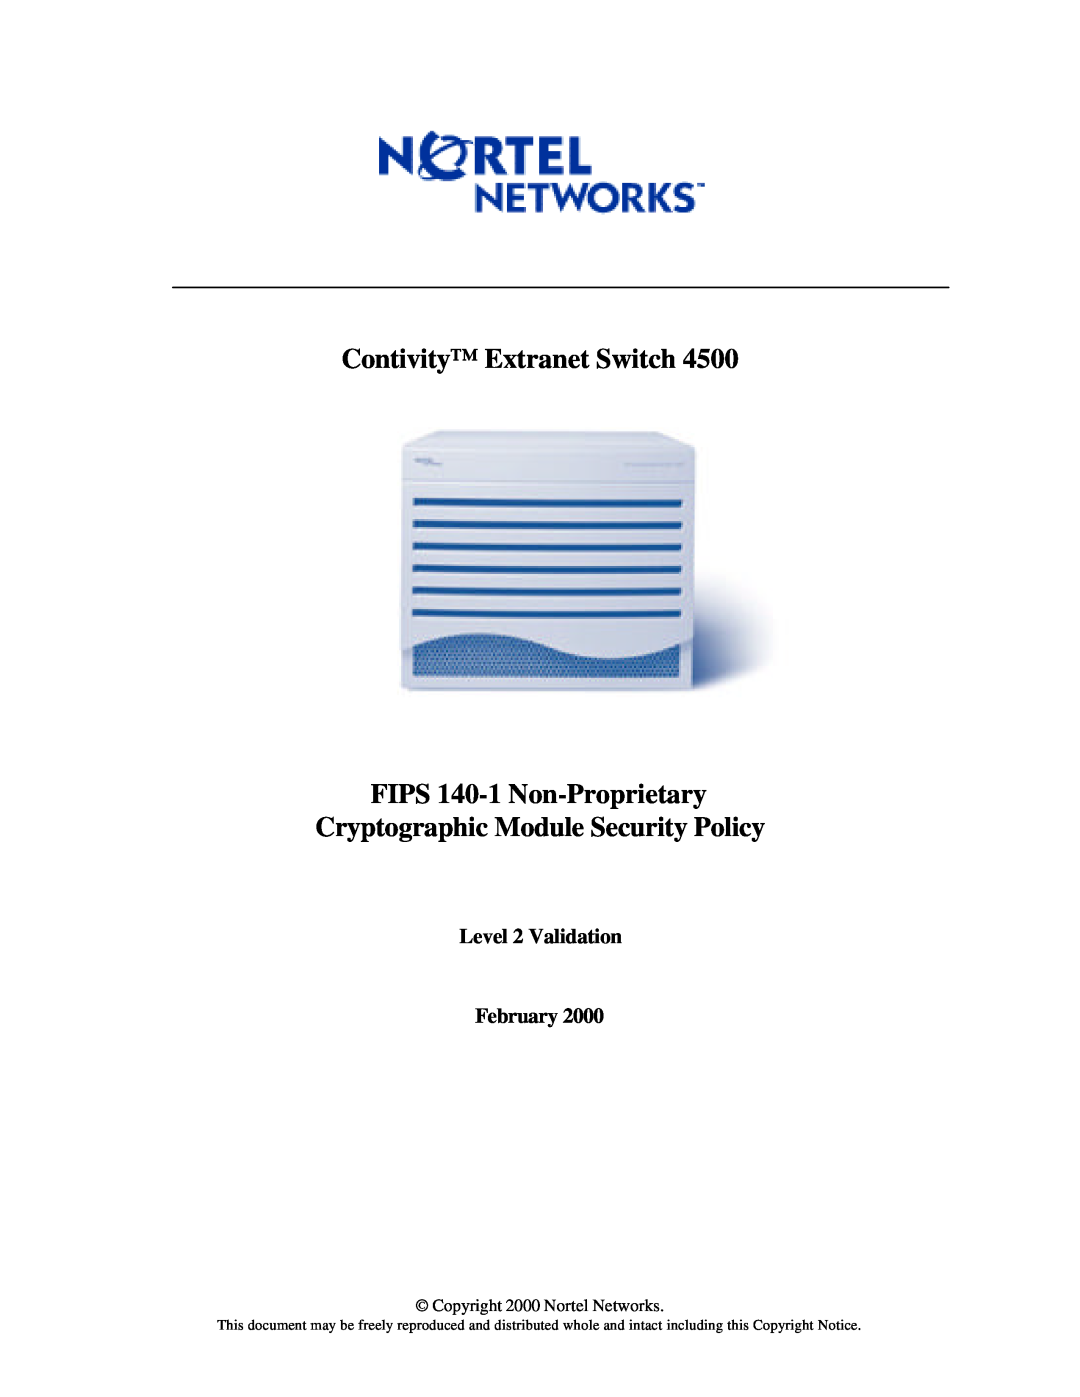 Nortel Networks 4500 FIPS manual Level 2 Validation February, Contivity Extranet Switch FIPS 140-1 Non-Proprietary 